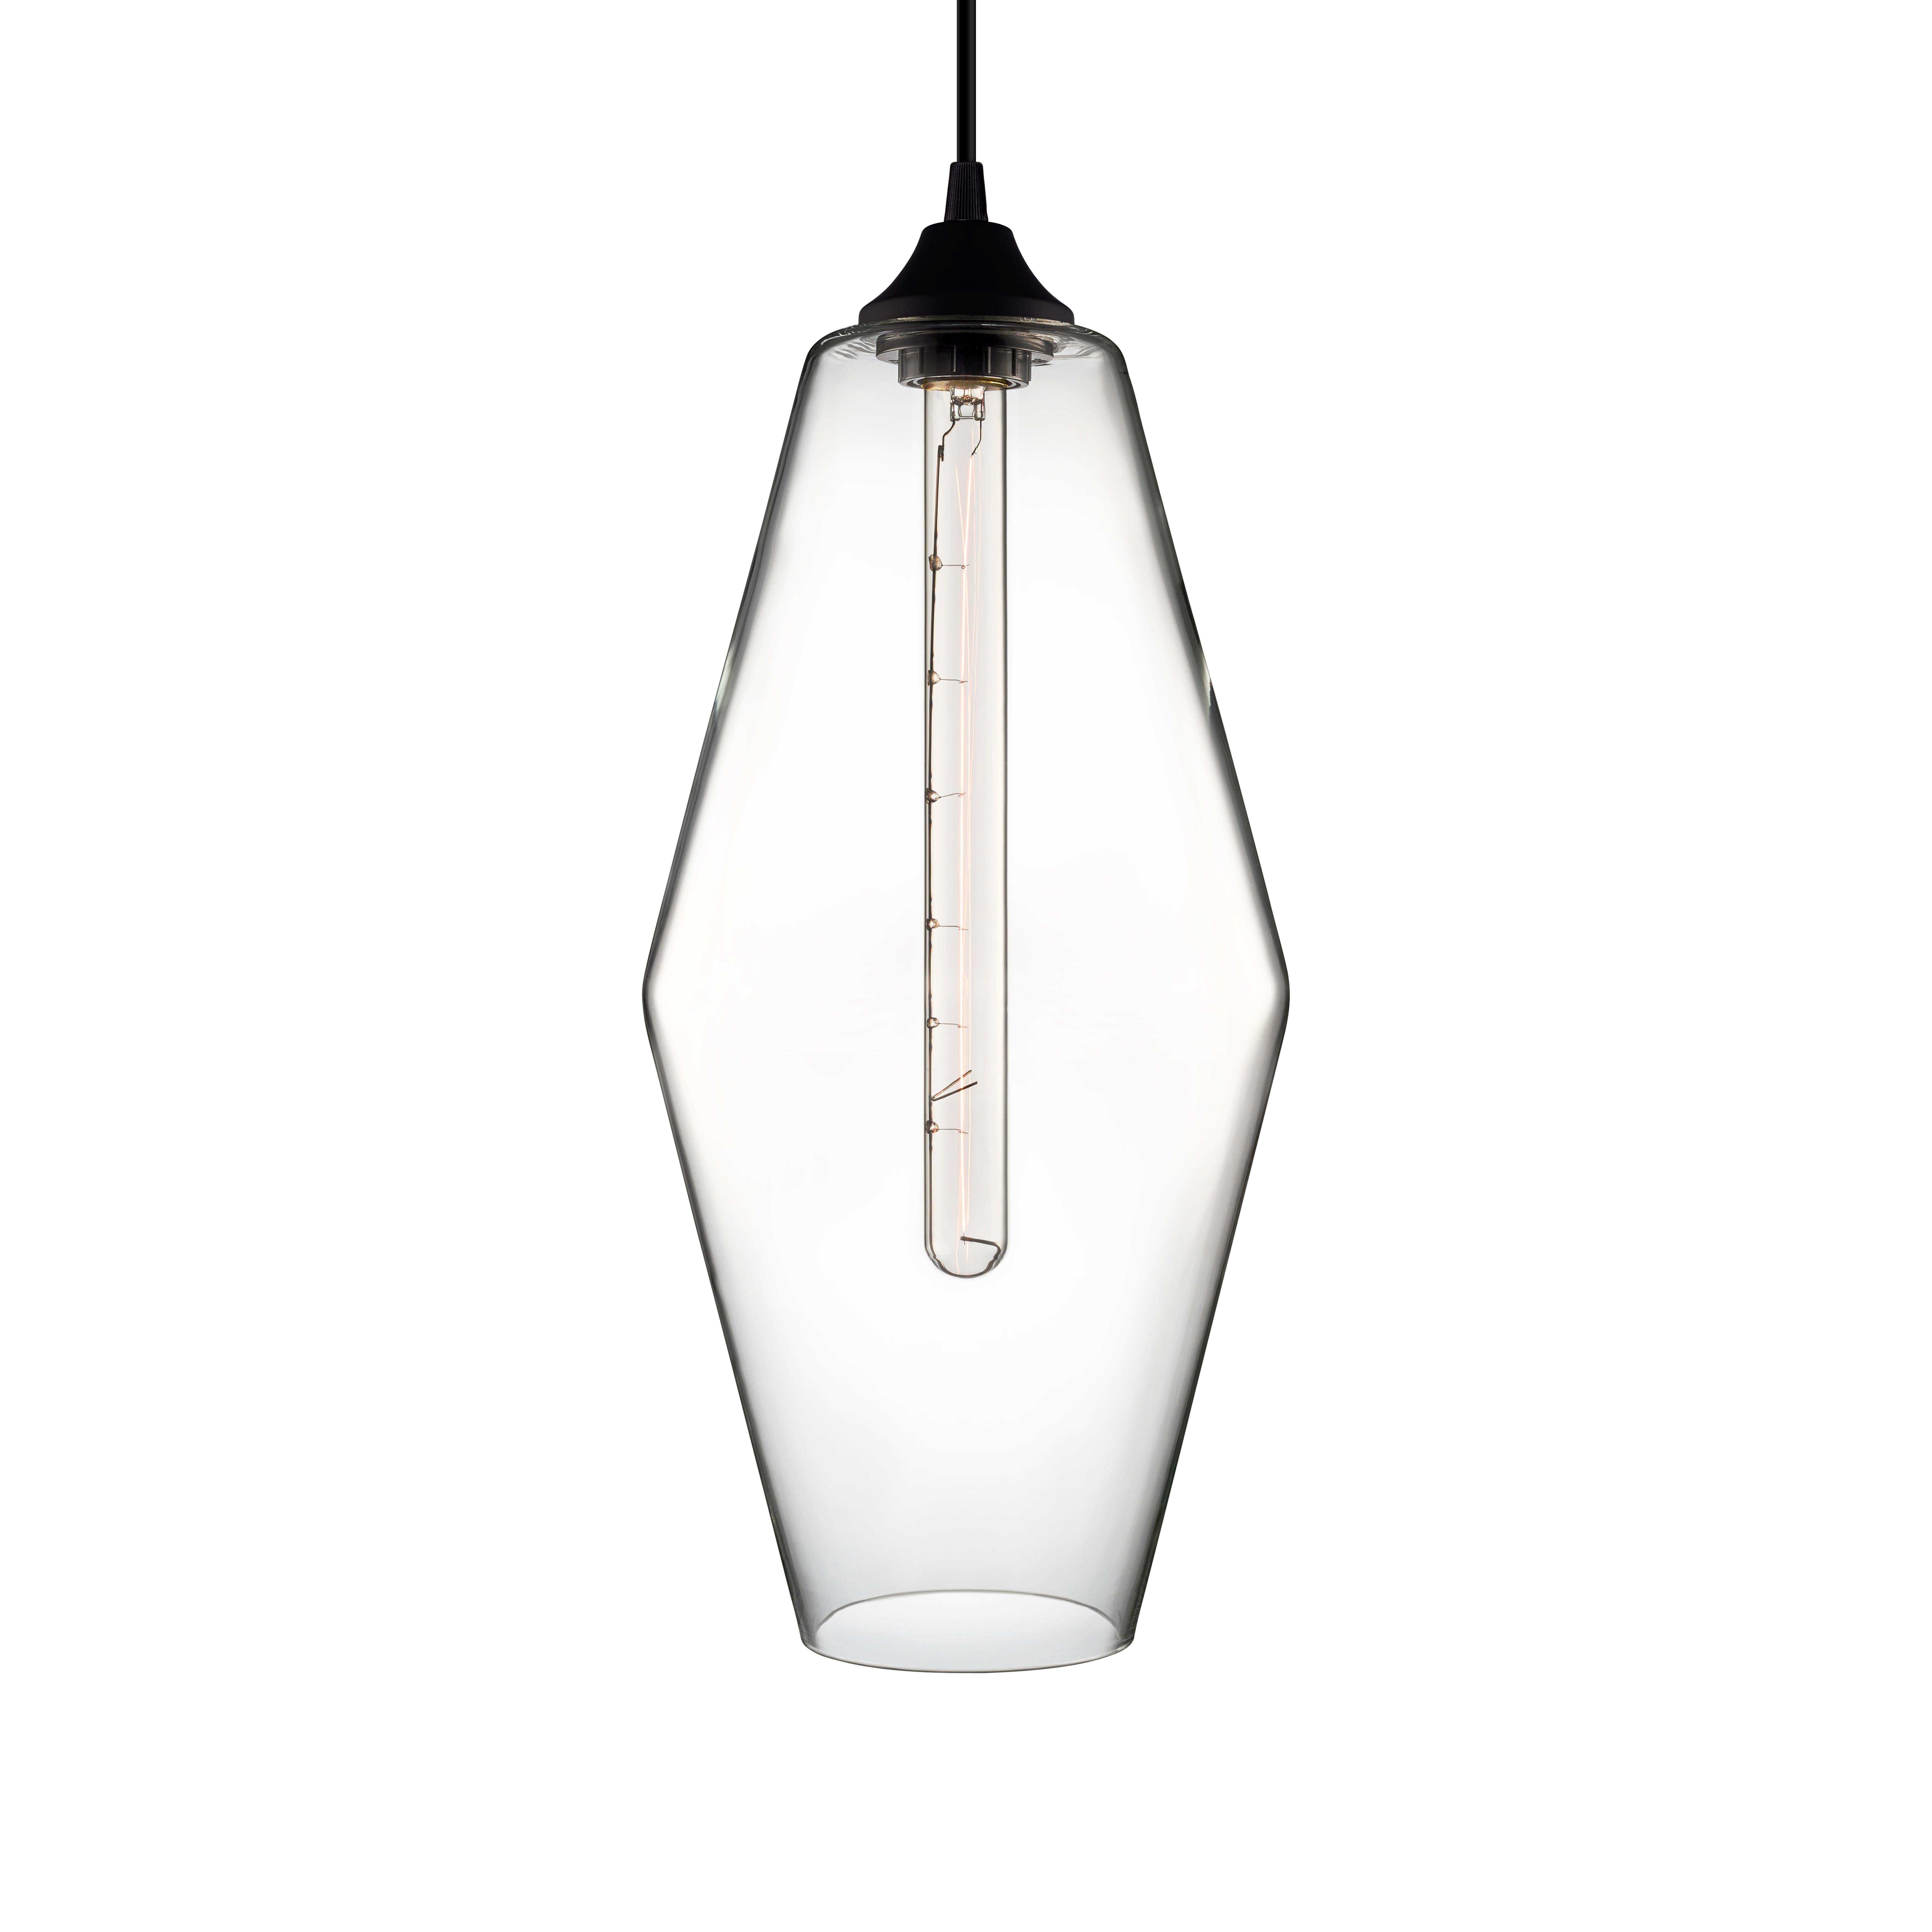 American Marquise Grand Gray Optique Handblown Modern Glass Pendant Light, Made in the US For Sale